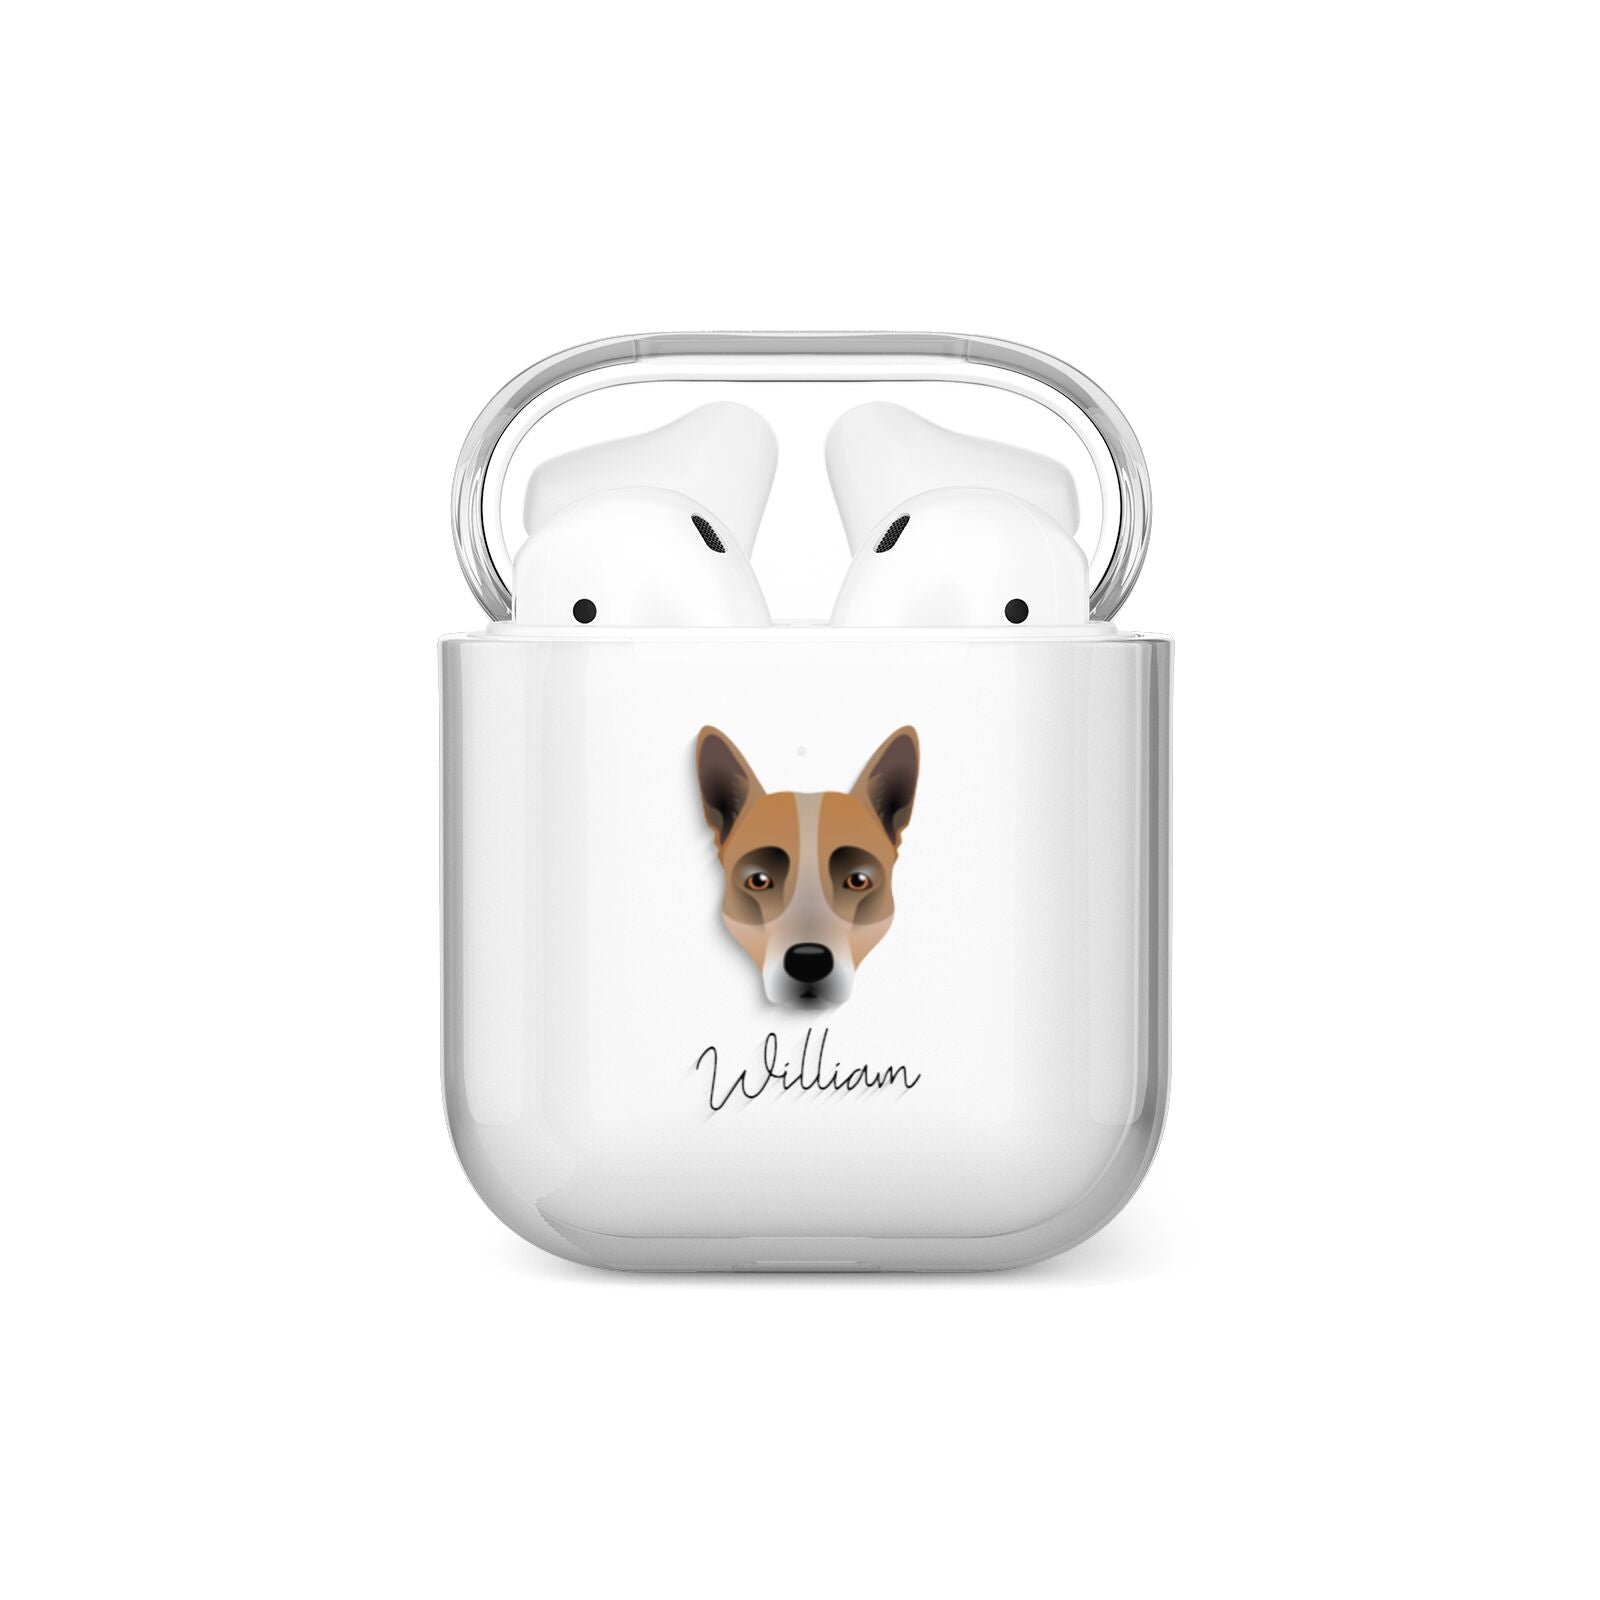 Australian Cattle Dog Personalised AirPods Case